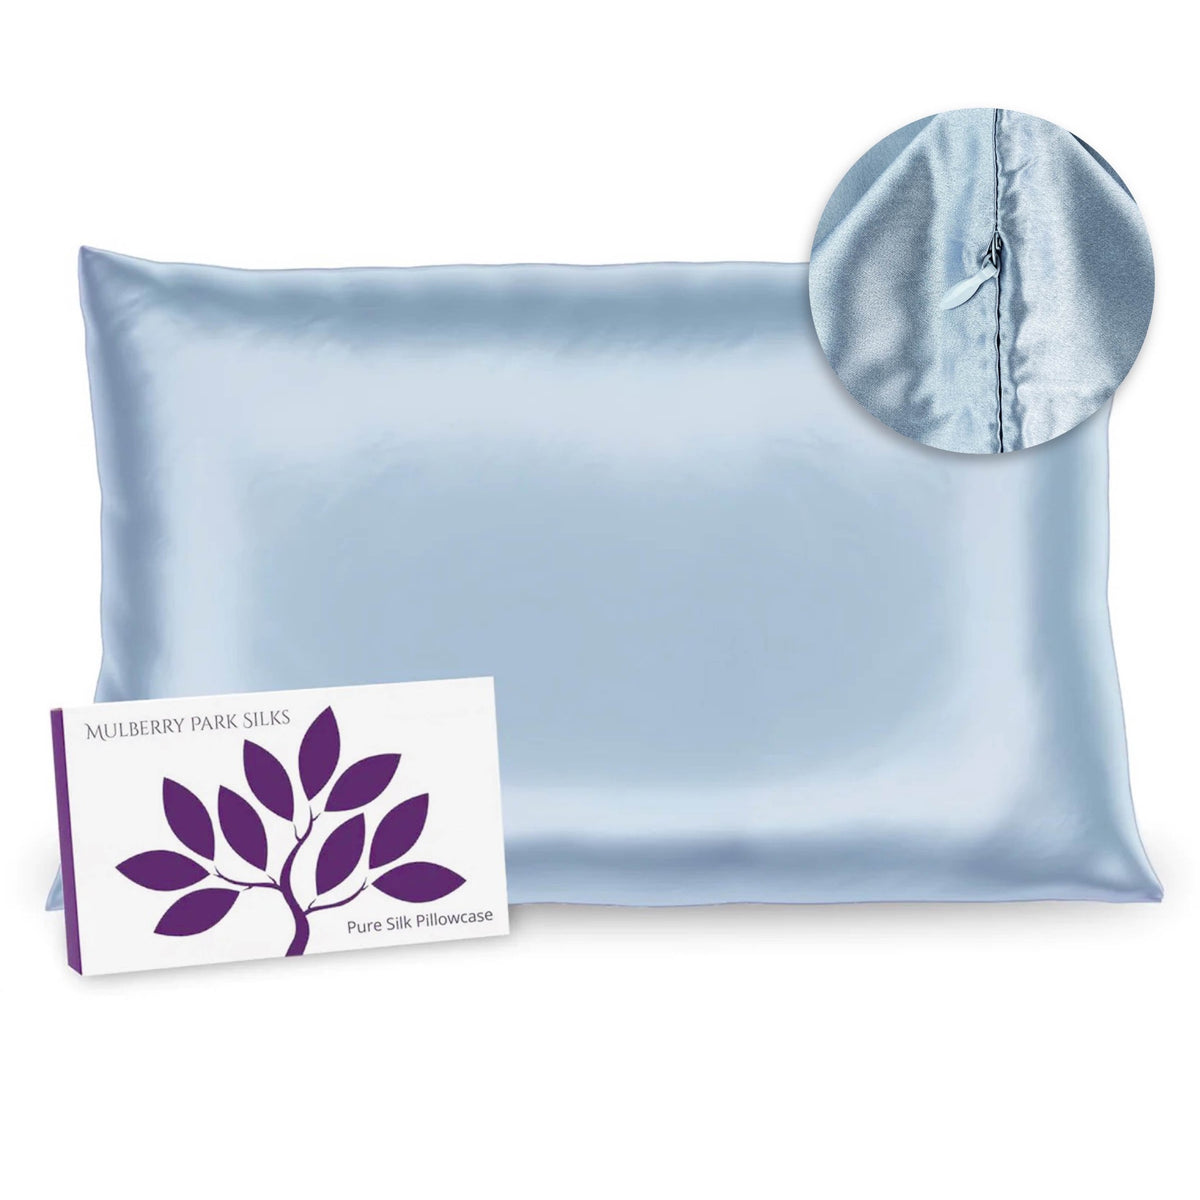 Hidden Zipper of Mulberry Park Silks Deluxe 19 Momme Pure Silk Pillowcase in Blue Color